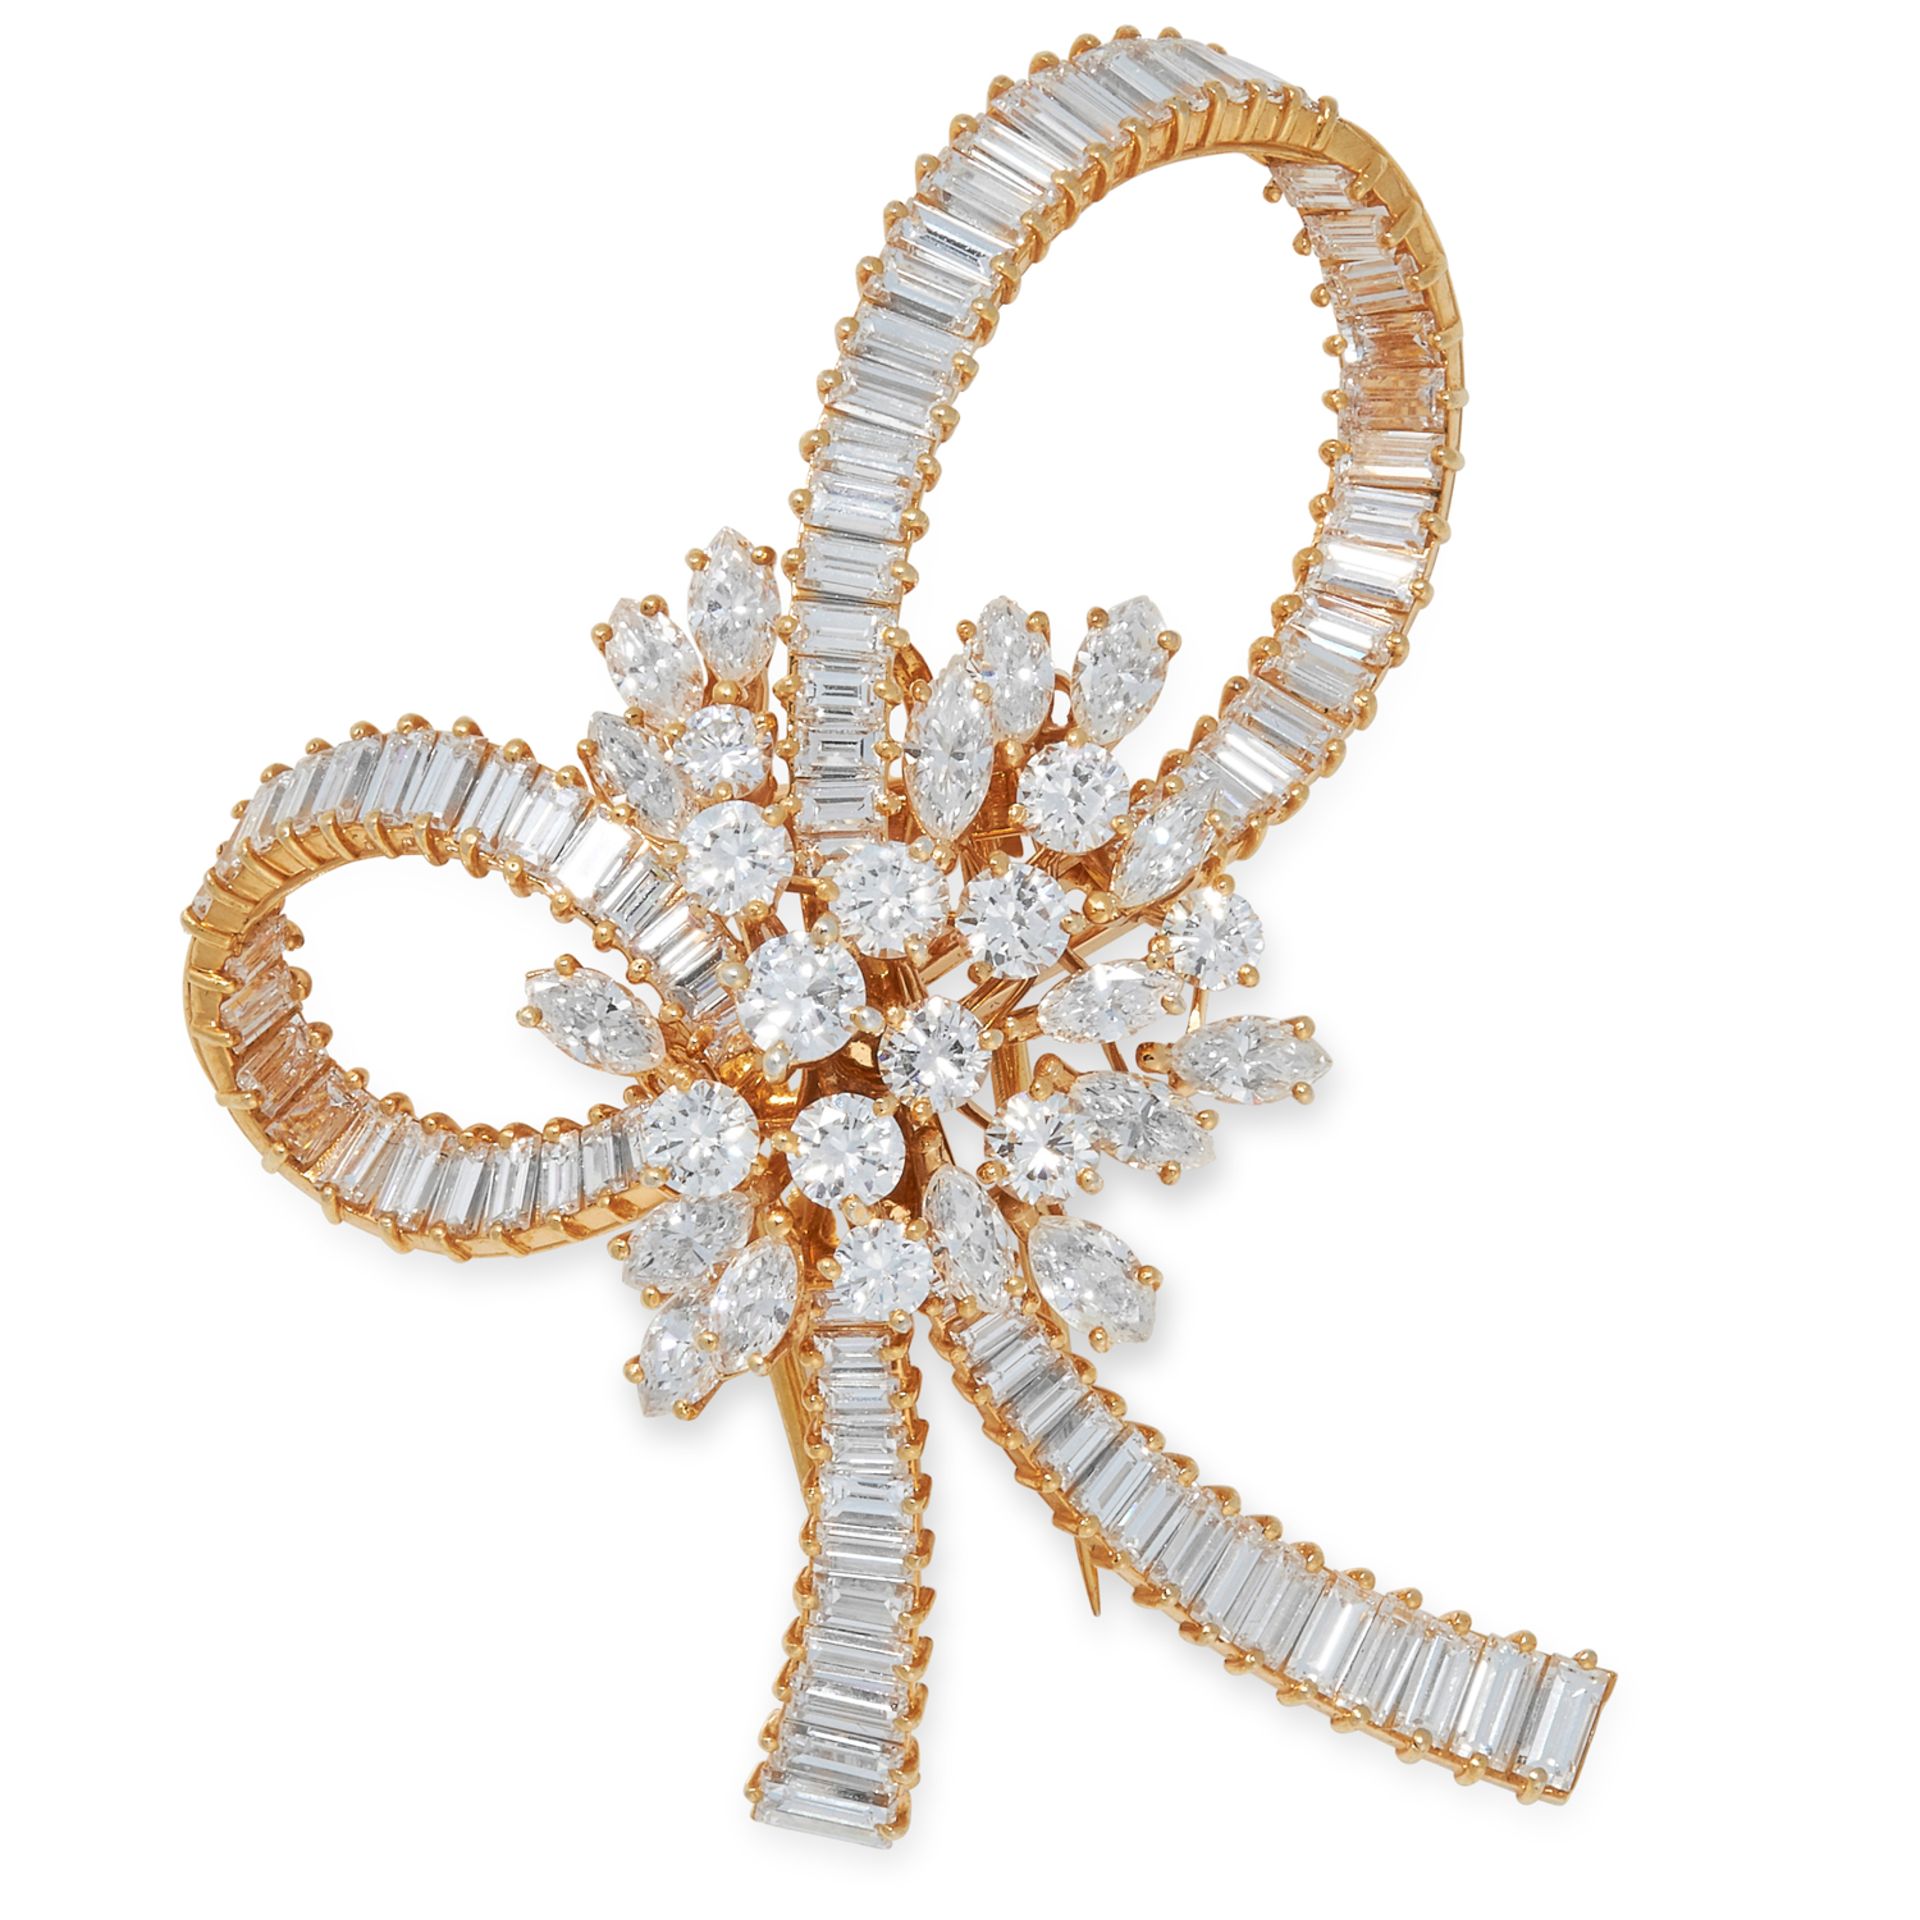 A DIAMOND BOW BROOCH set with round, marquise and baguette cut diamonds totalling approximately 9.00